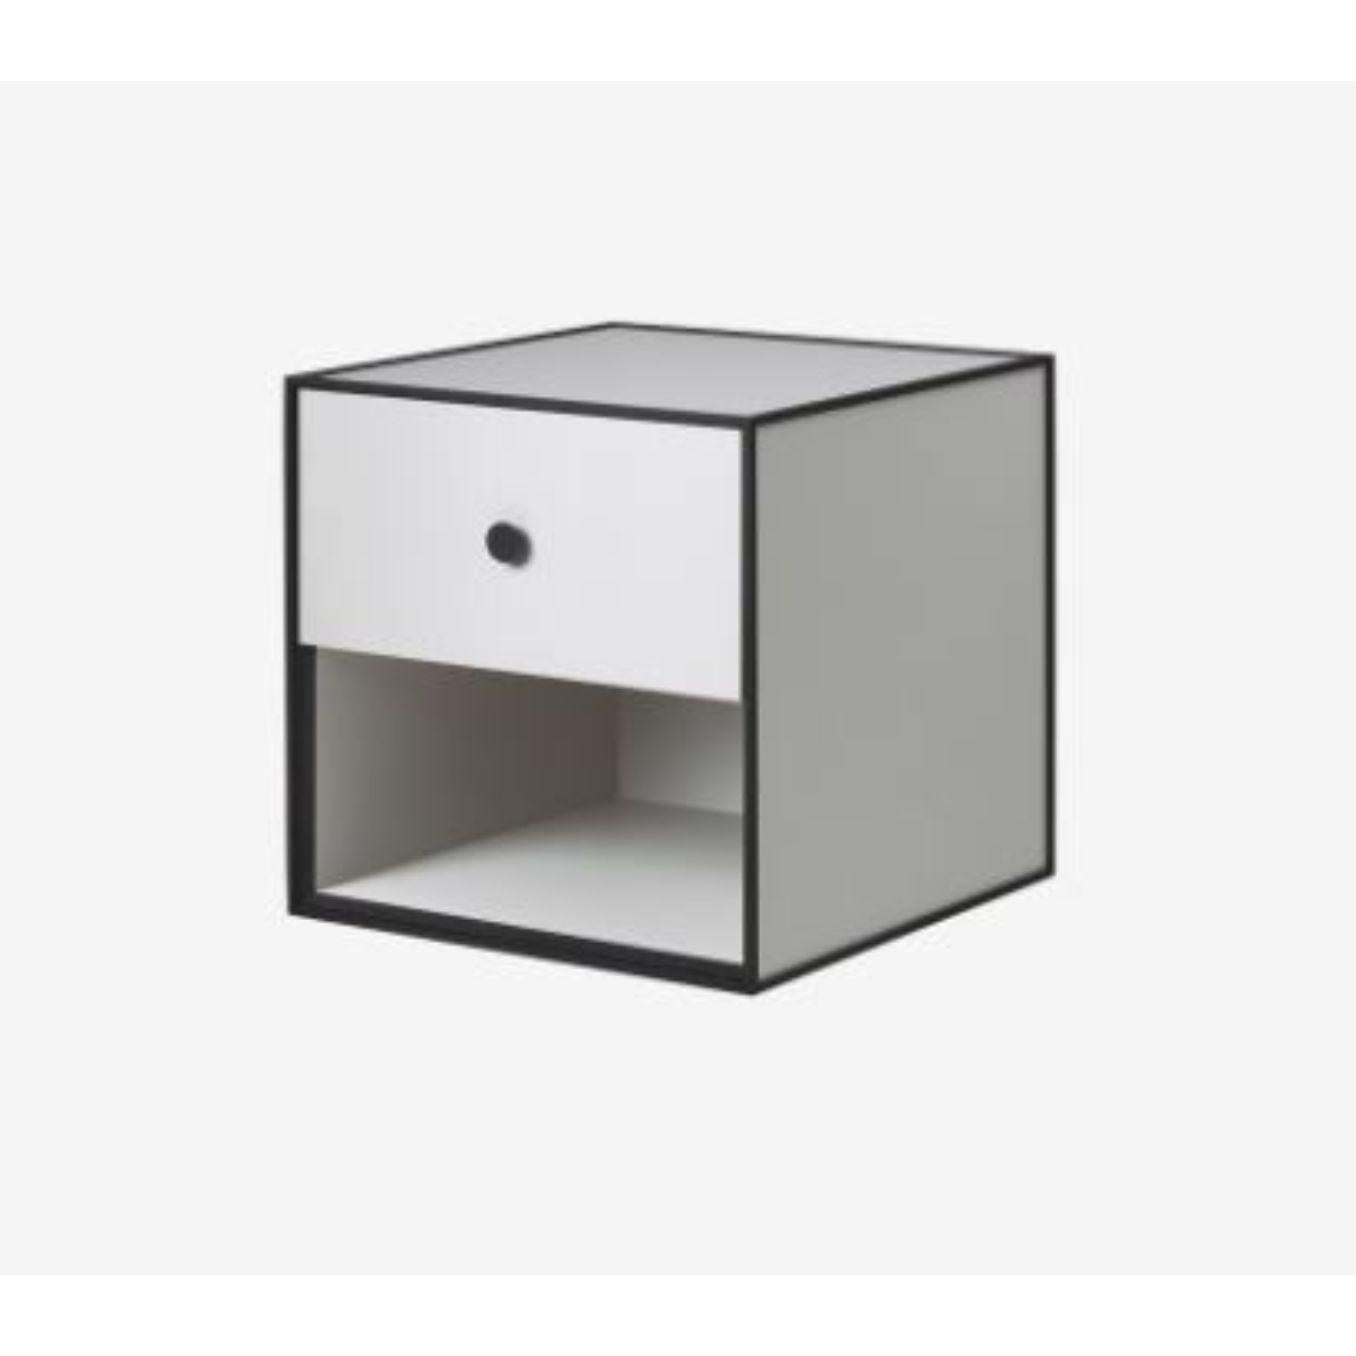 35 light grey frame box with 1 drawer by Lassen
Dimensions: W 35 x D 35 x H 35 cm 
Materials: Finér, Melamin, Melamin, Melamine, Metal, Veneer,
Also available in different colors and dimensions. 

By Lassen is a Danish design brand focused on